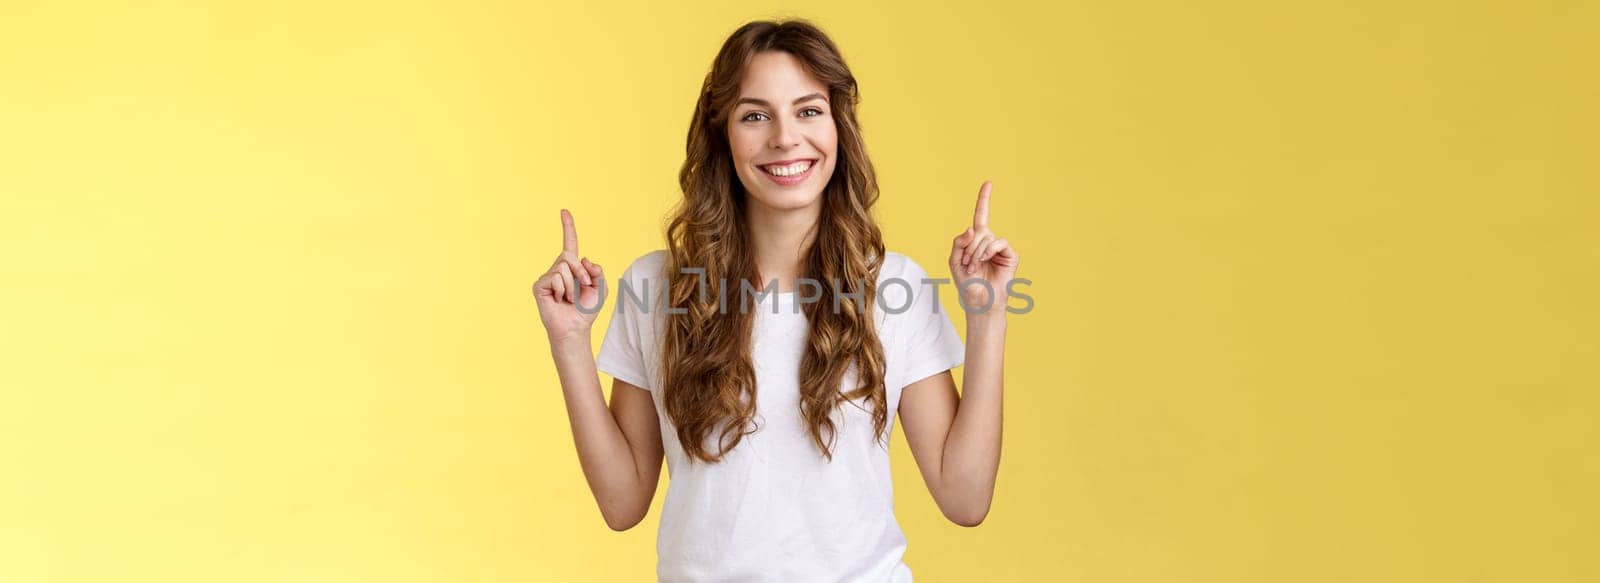 Self-assured confident lively charming european tall girl showing advicing cool promo pointing up index fingers smiling toothy delighted introuce excellent choice advertisement yellow background.